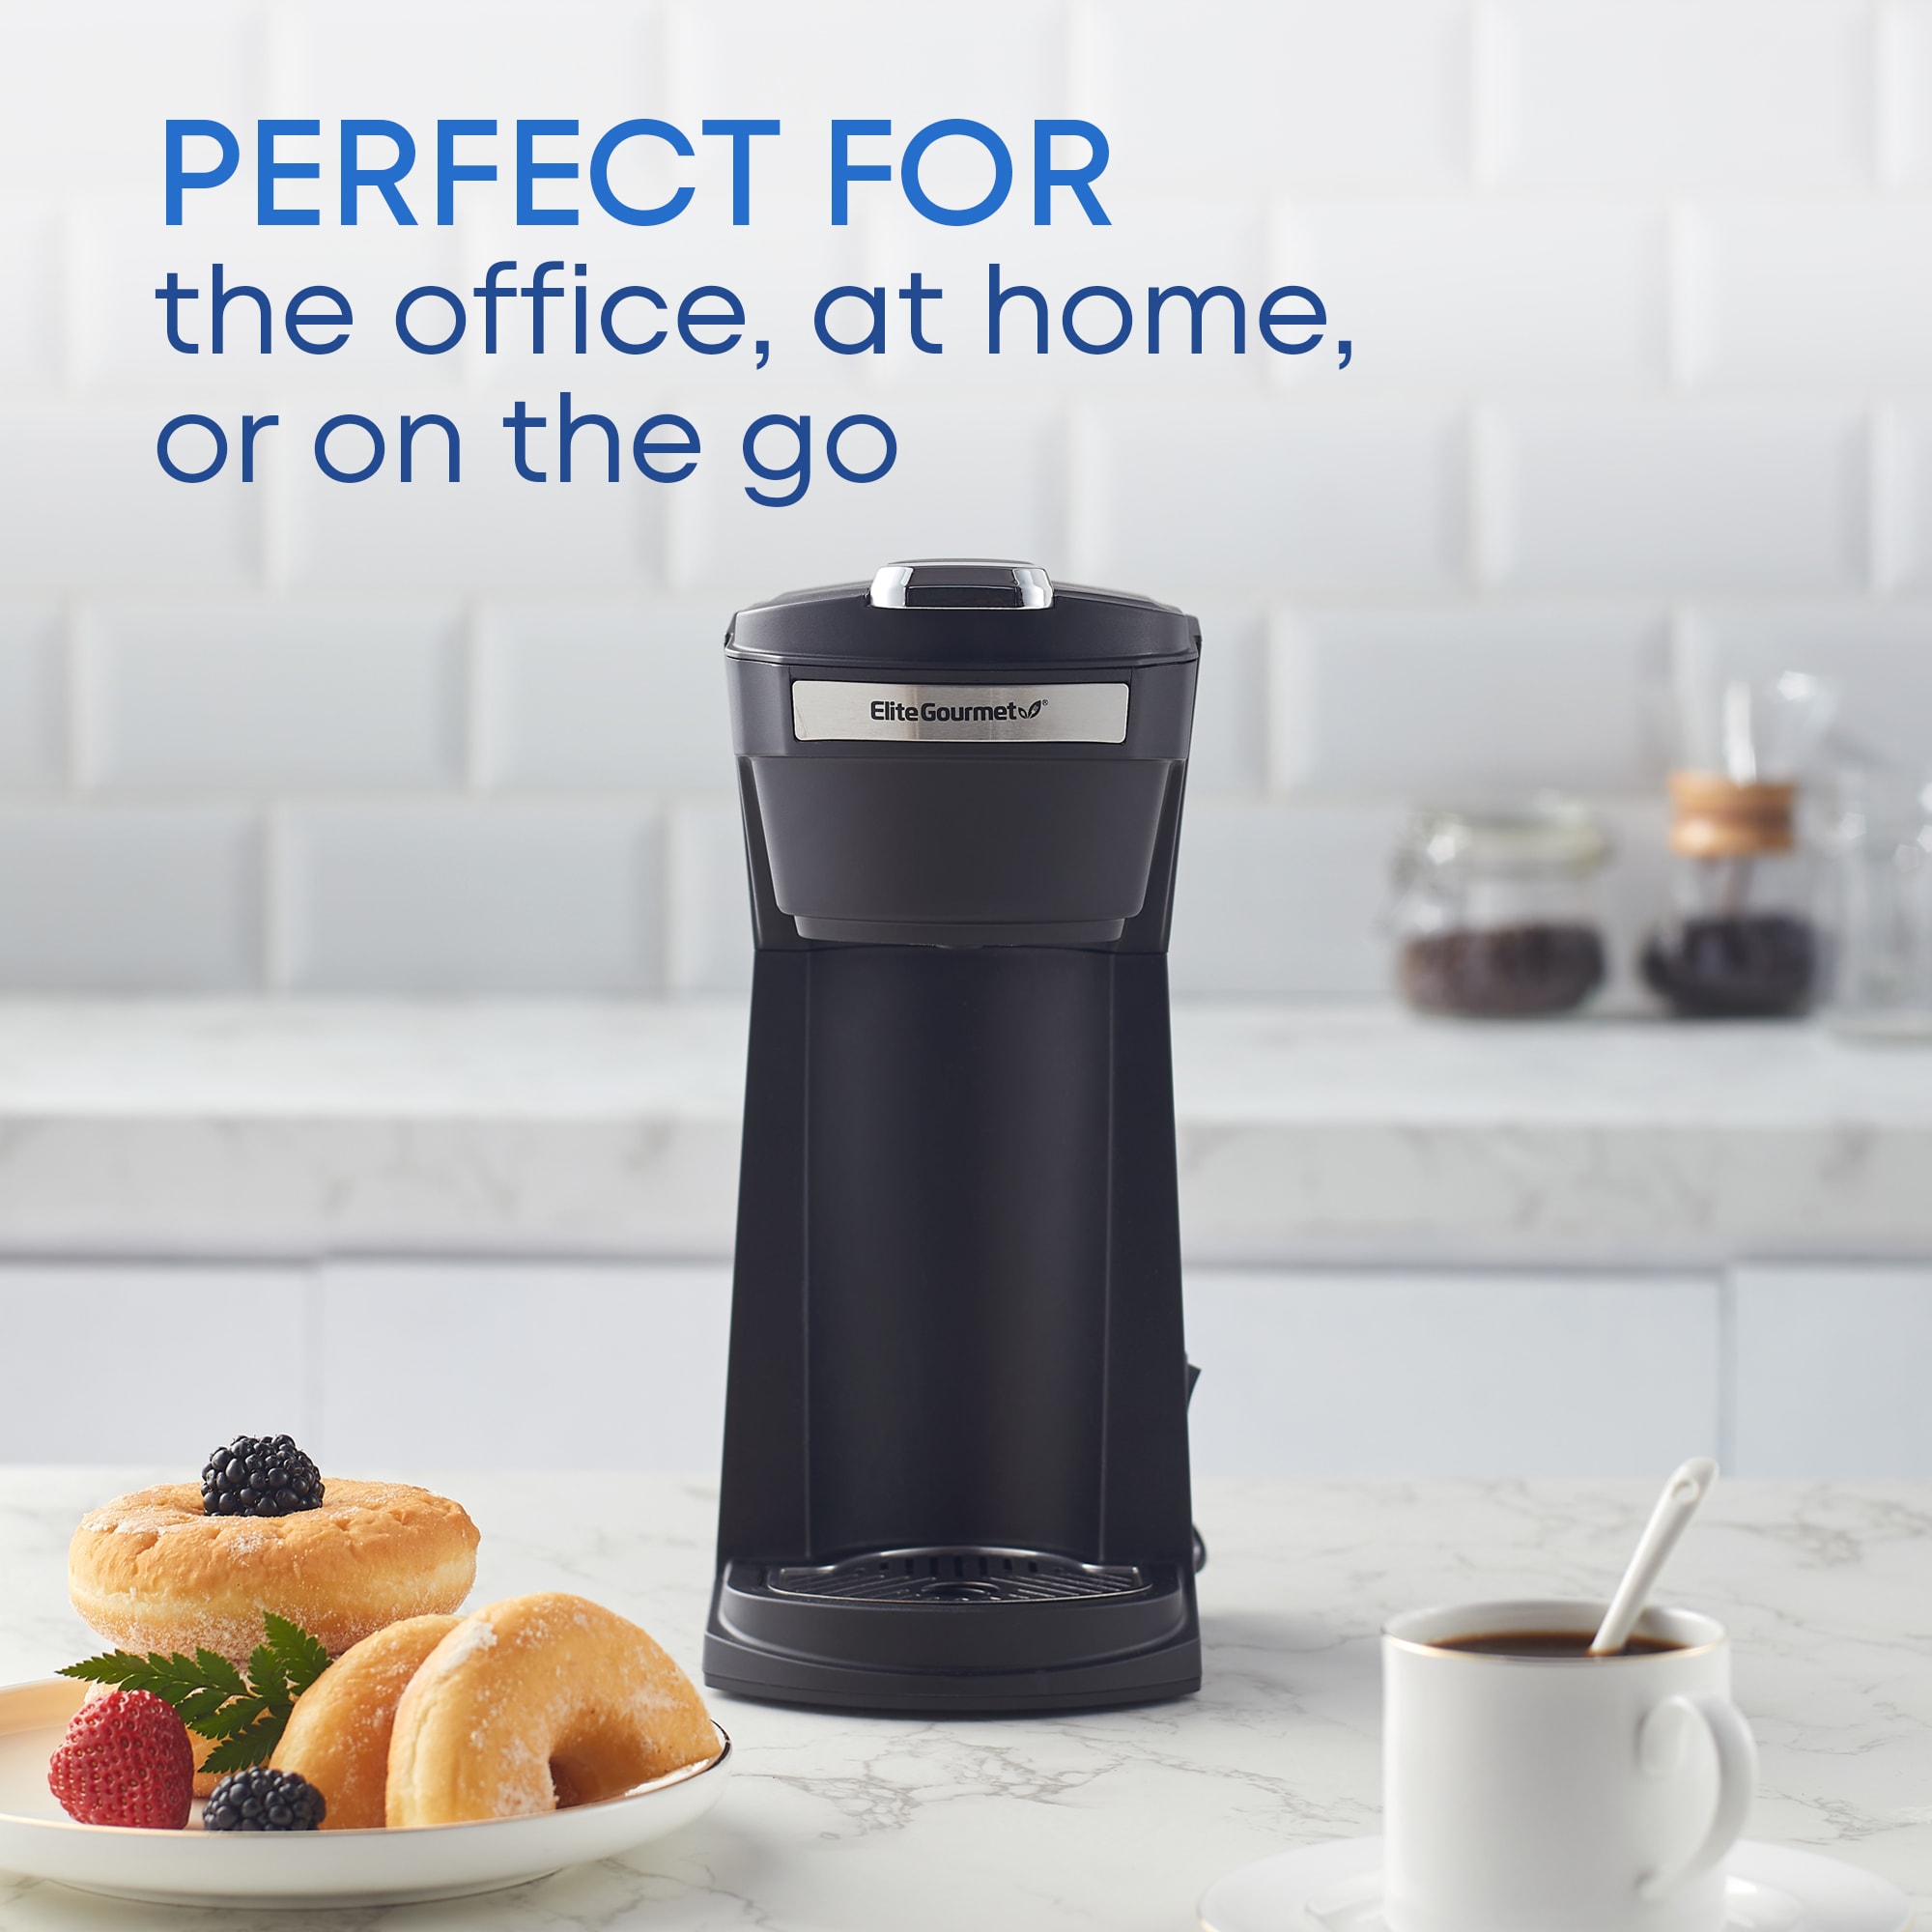 IMUSA Simply Brew To Go Single Serve Drip Coffee Maker With Travel Tumbler